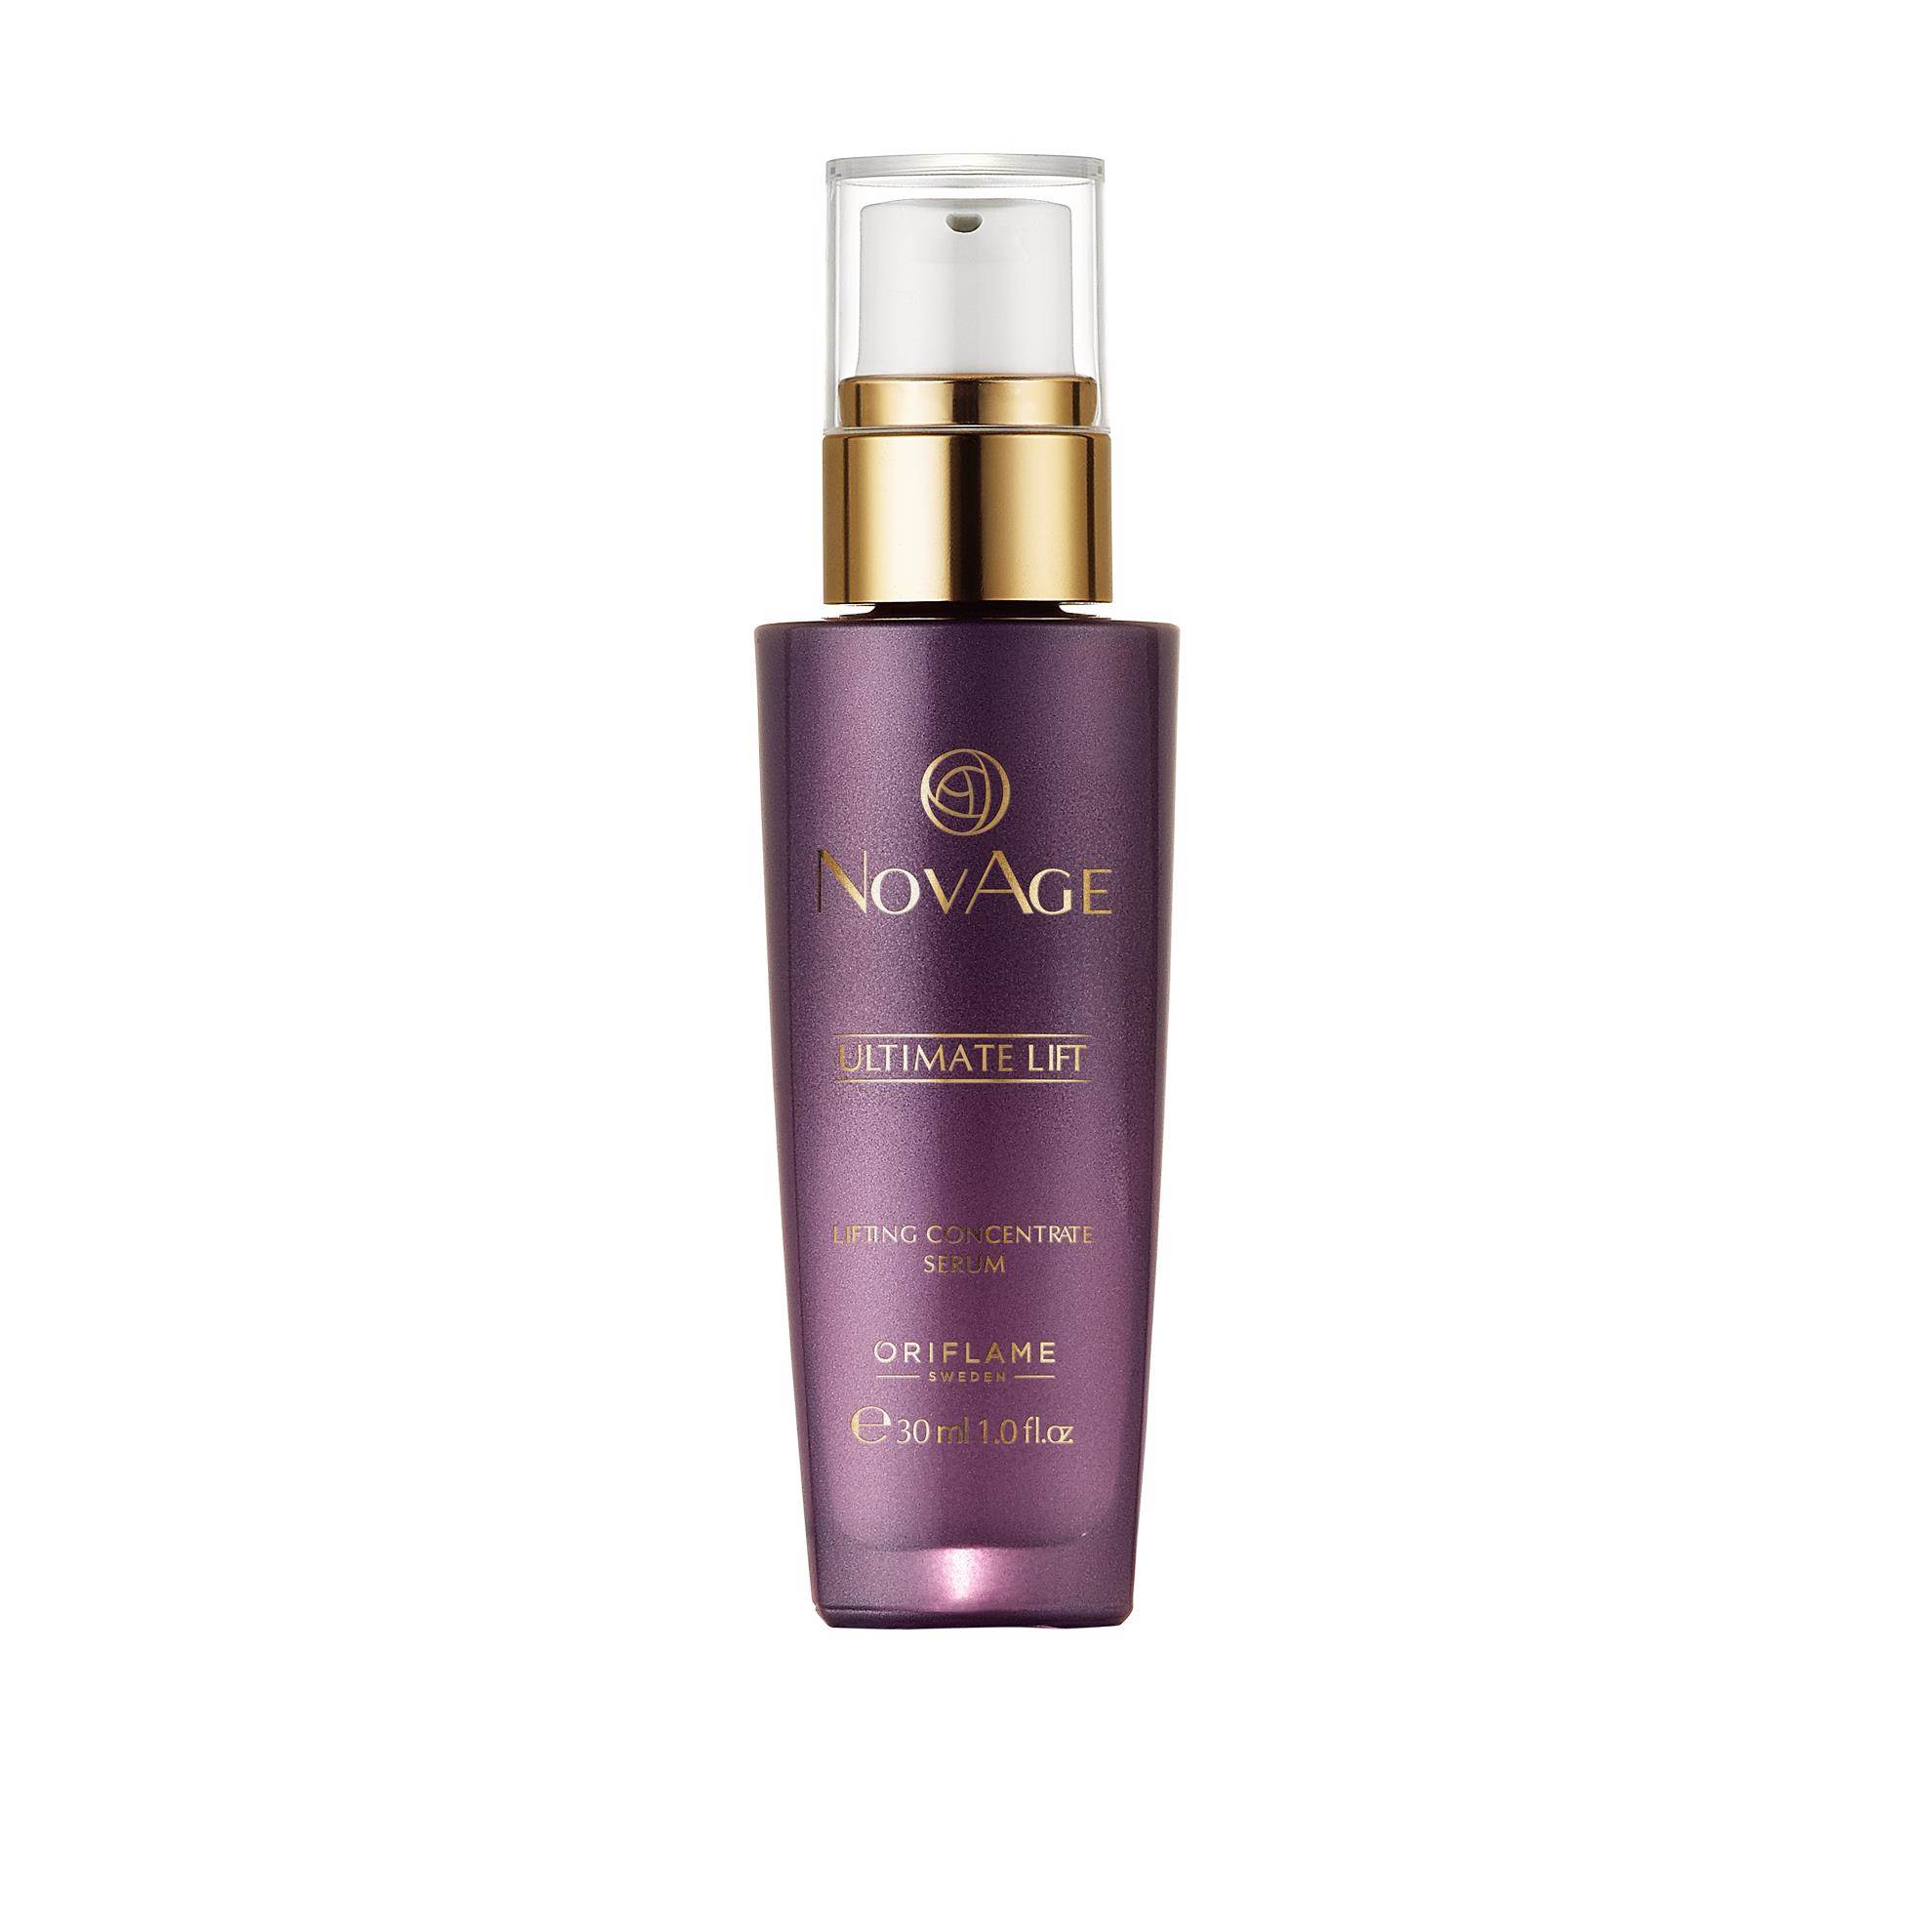 novage-ultimate-lift-lifting-concentrate-serum